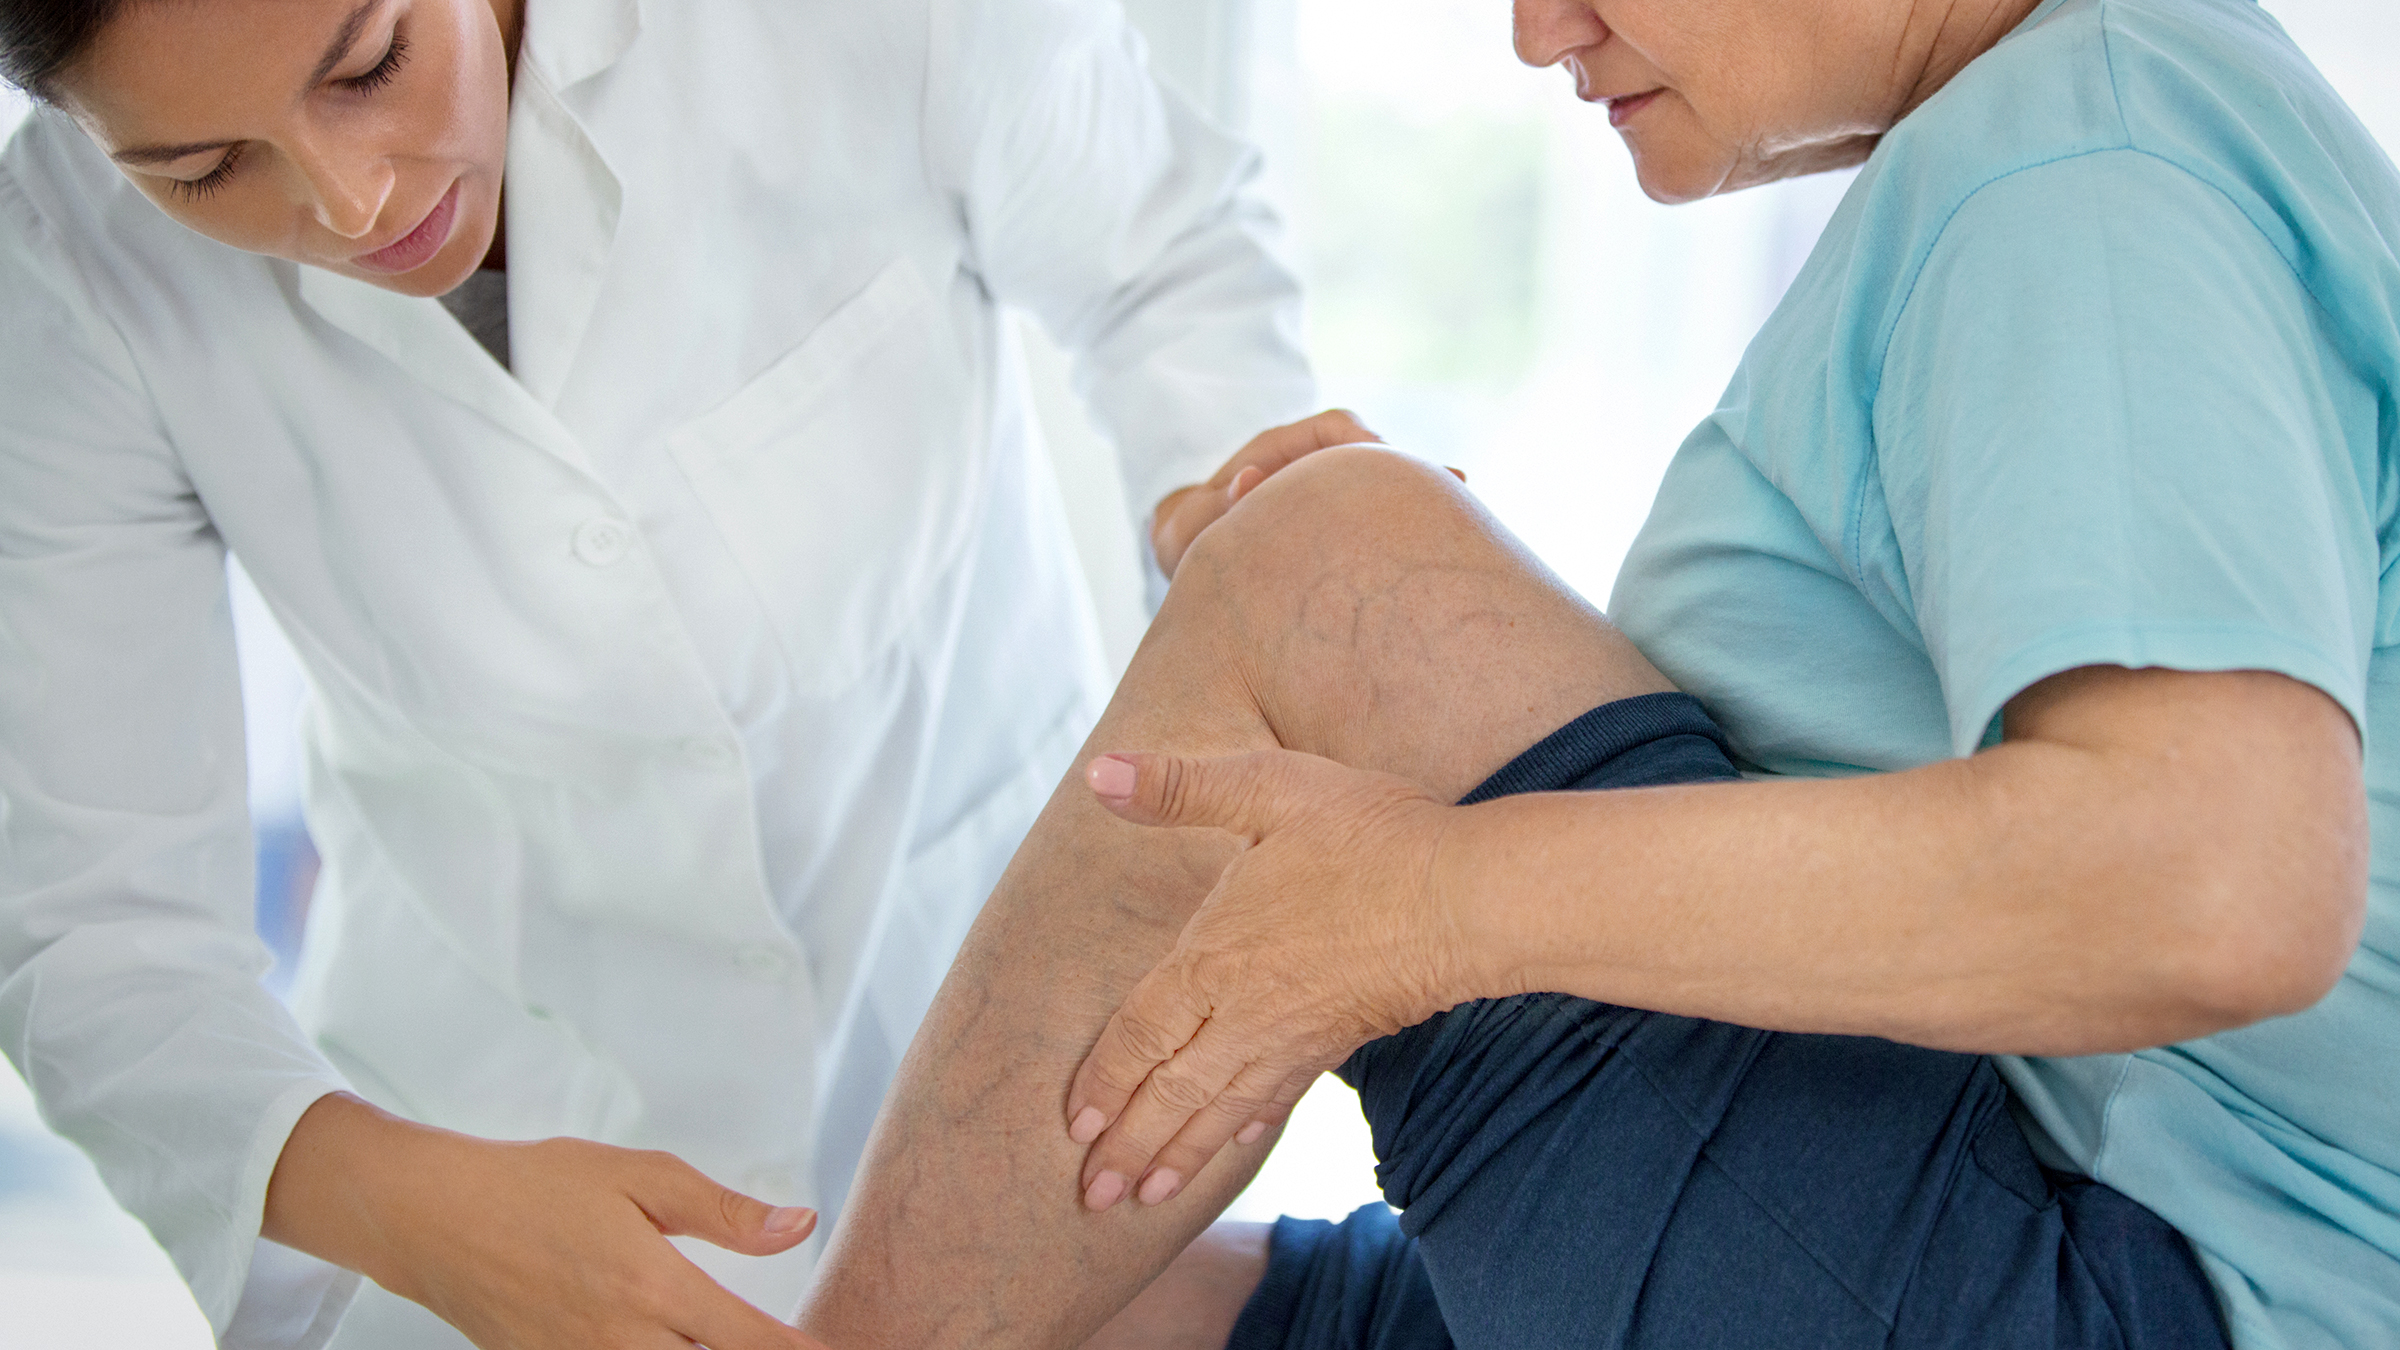 Treatment Options for Varicose Veins